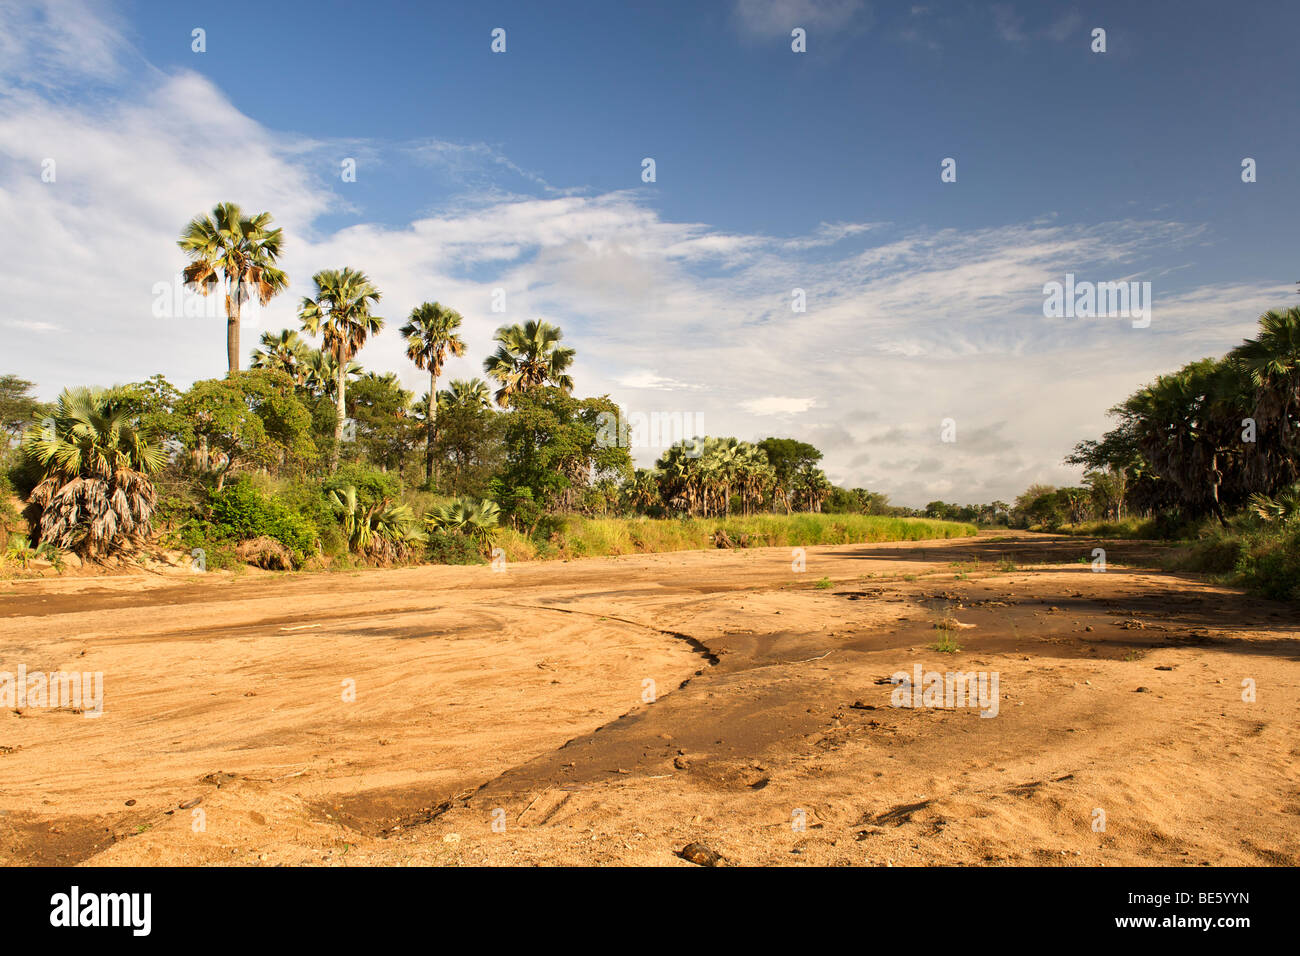 The dry bed of the Kidepo river in Kidepo Valley National Park in northern Uganda. Stock Photo